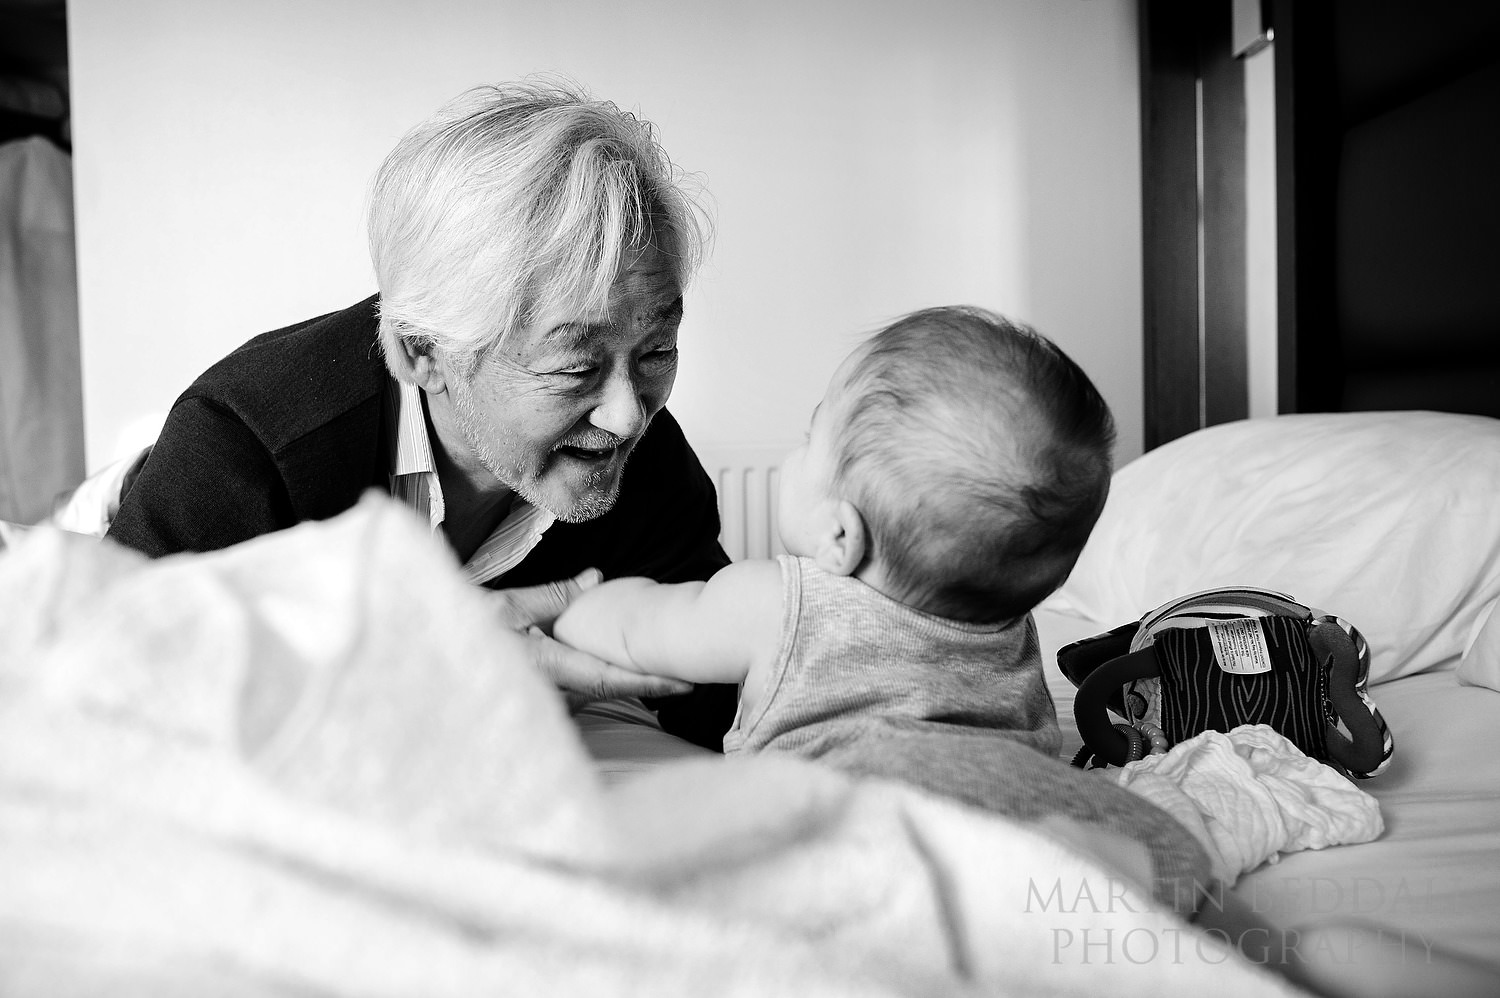 Playing with his grandfather